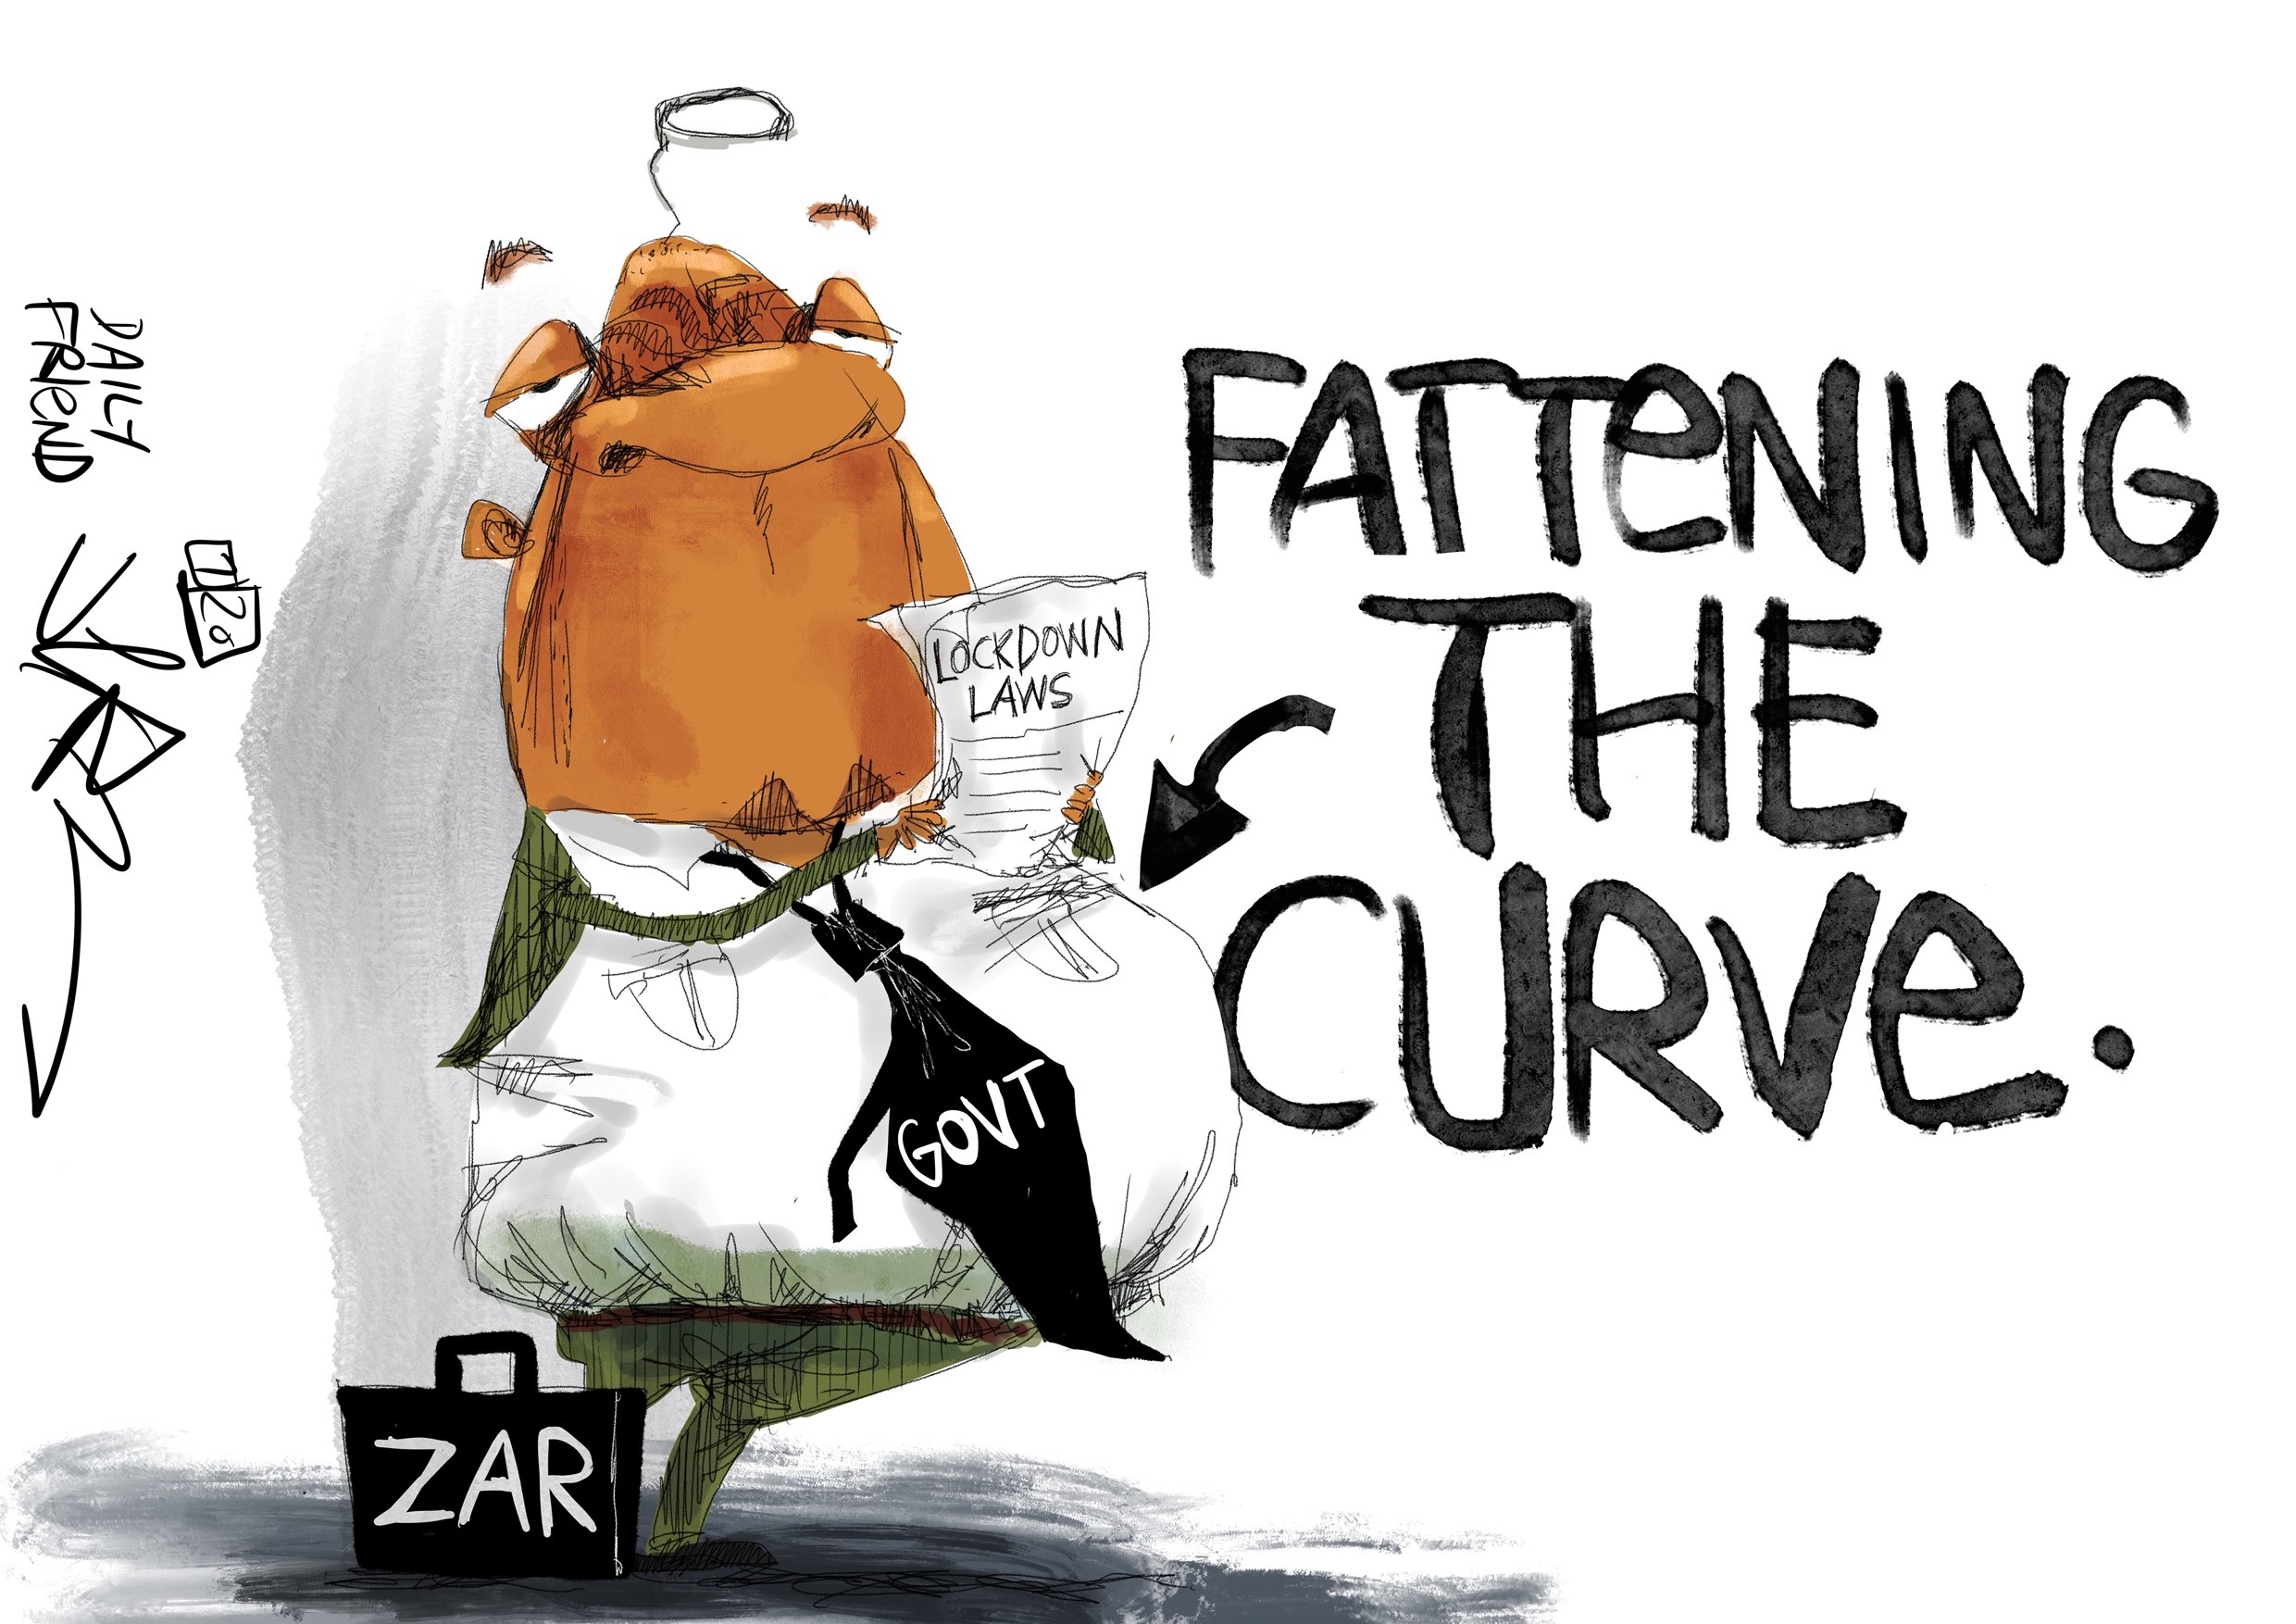 Fattening the curve pic